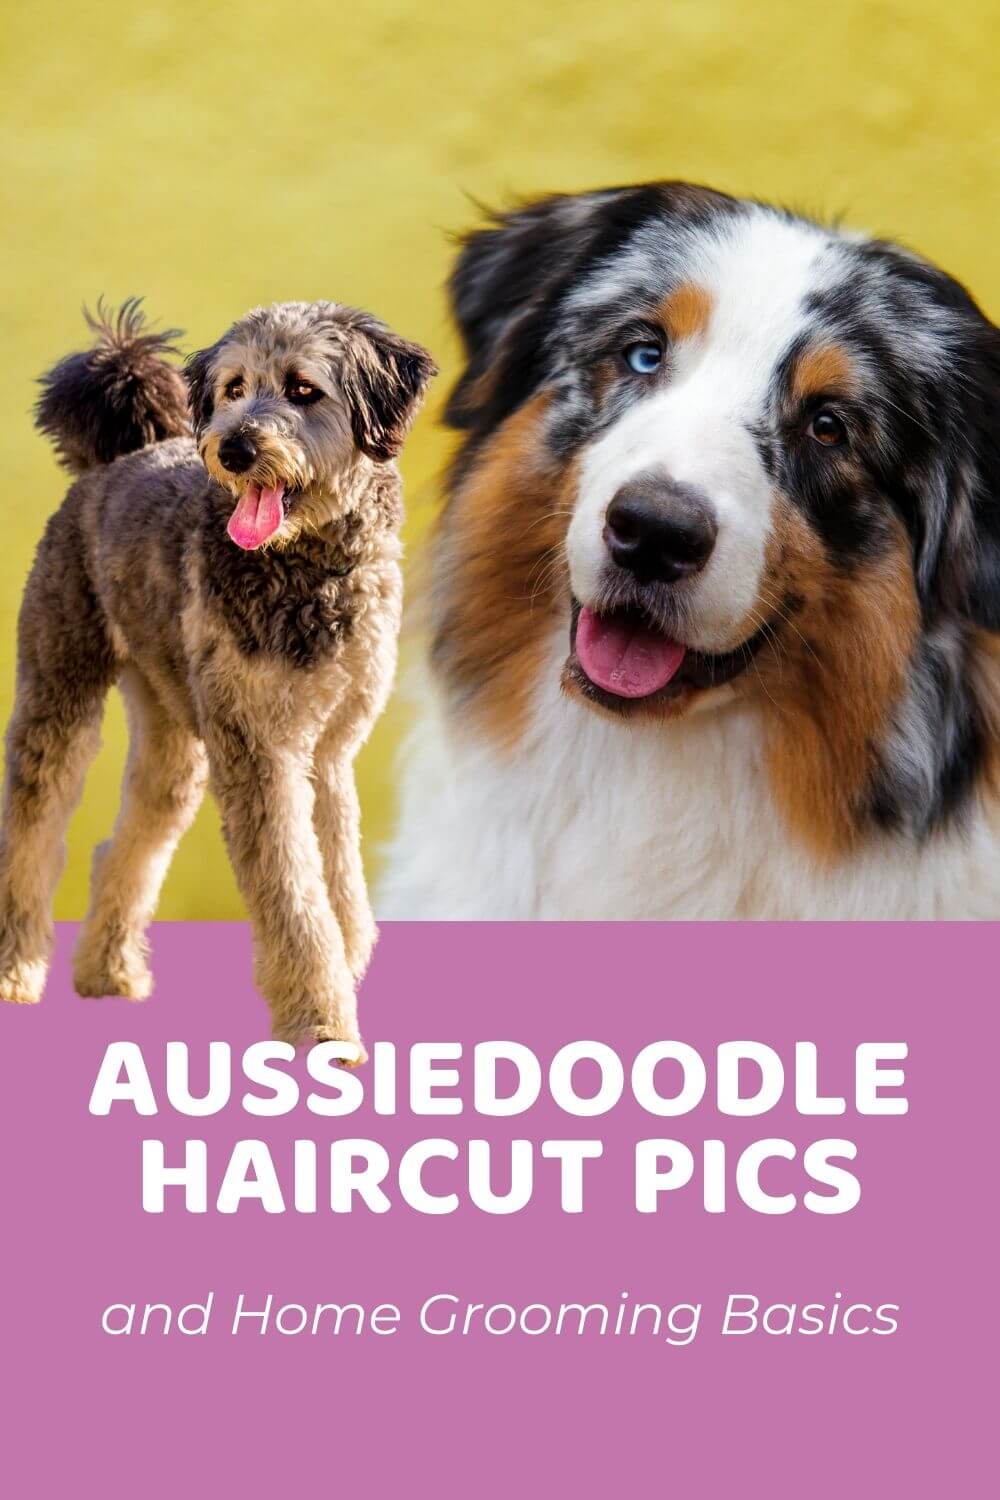 Top 5 Aussiedoodle Haircuts (With Pictures) and Home Grooming Tips (1)